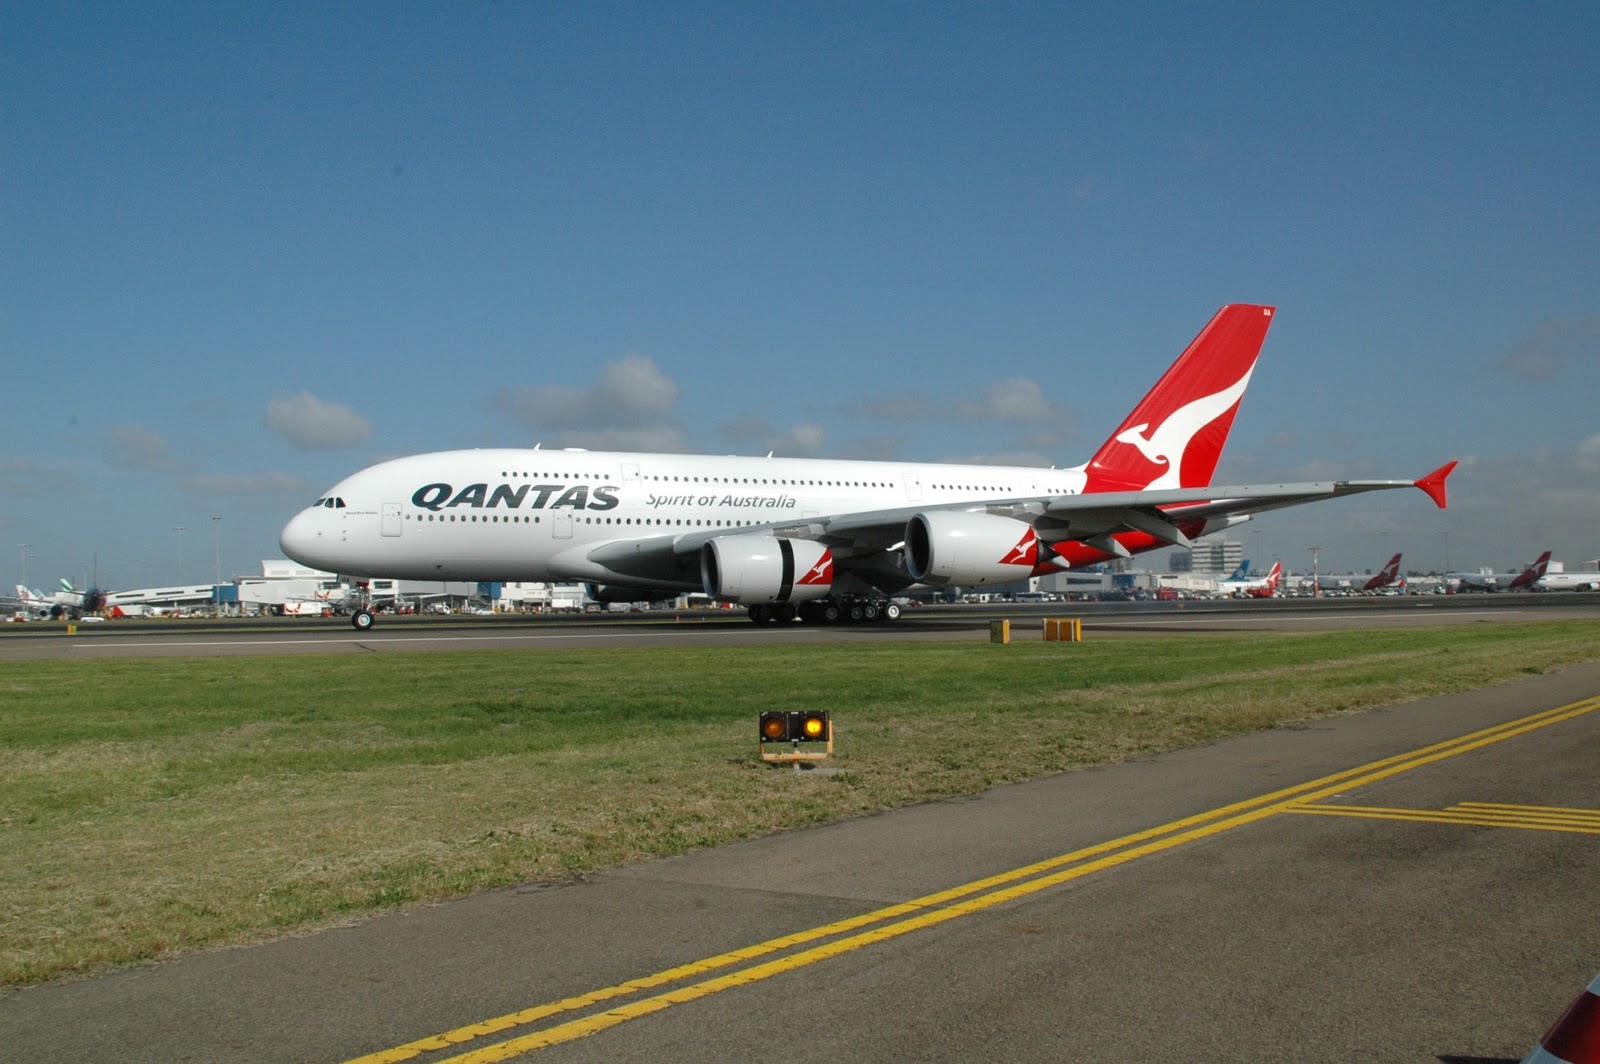 Airplanes Phots And Image Quantas Airline Airbus Planes At The